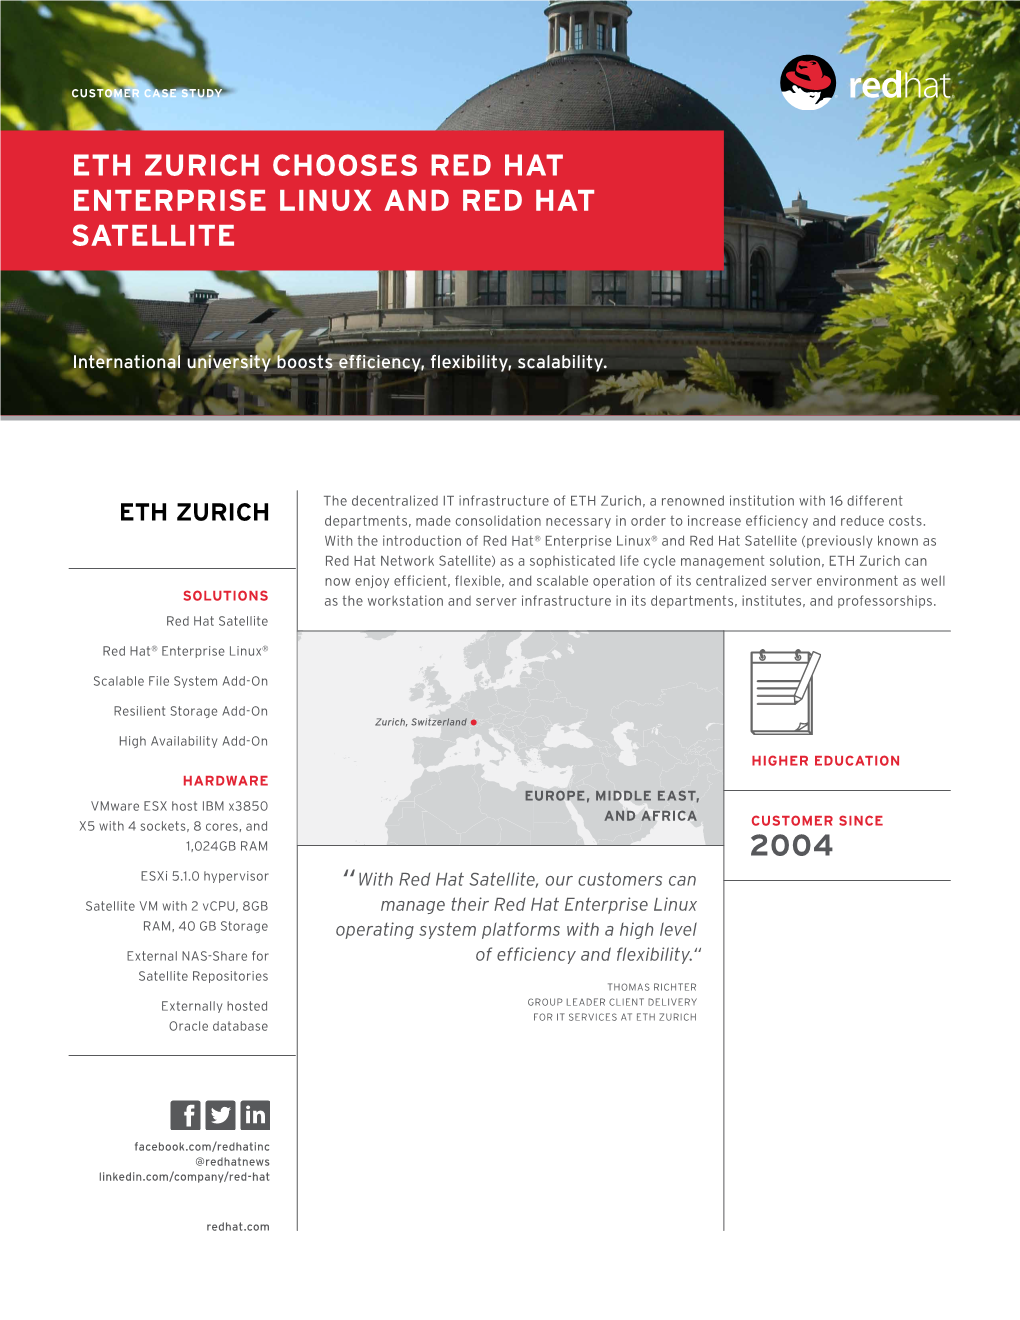 2004 Eth Zurich Chooses Red Hat Enterprise Linux and Red Hat Satellite